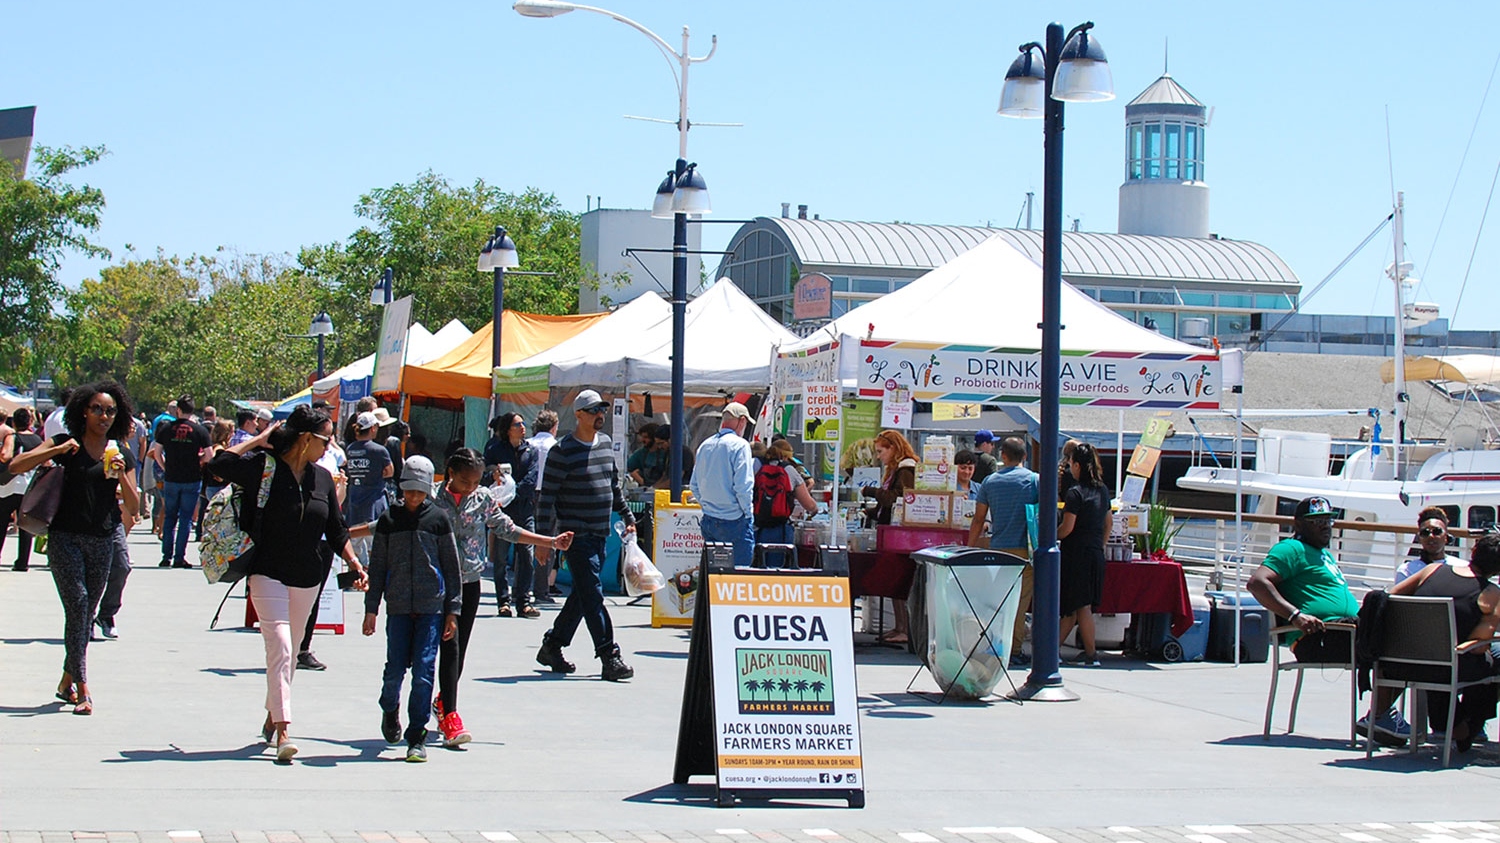 While picking up your berries and veggies at the Jack London Square Farmers Market, you might catch a cooking demo or a food tasting or even a fun activity for the kids. Photo courtesy of CUESA.